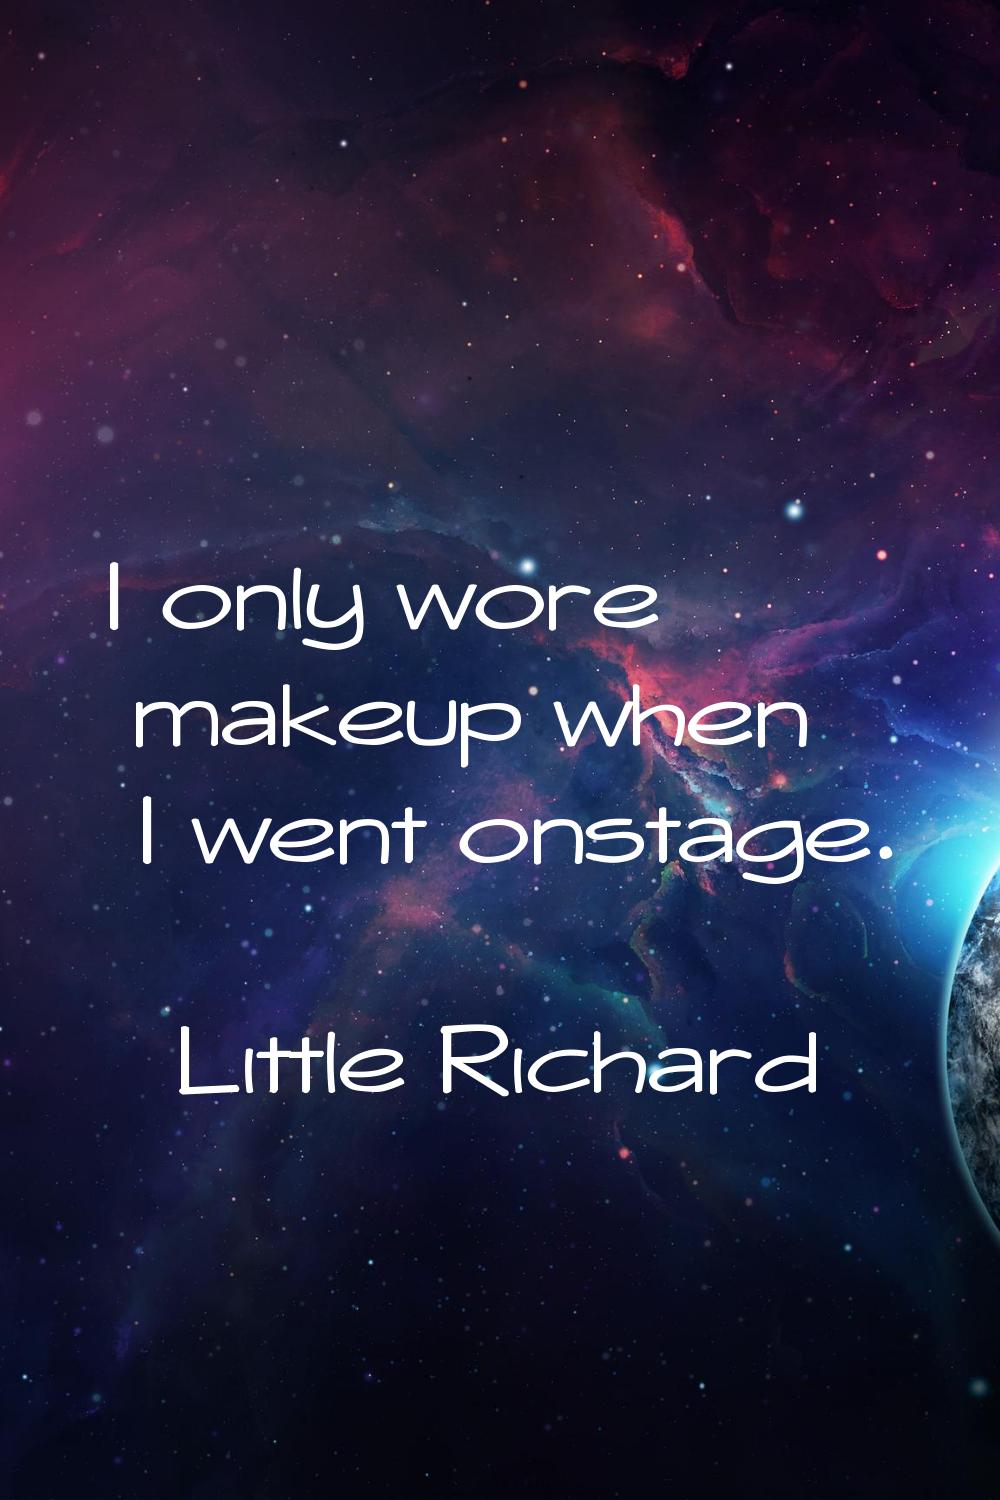 I only wore makeup when I went onstage.